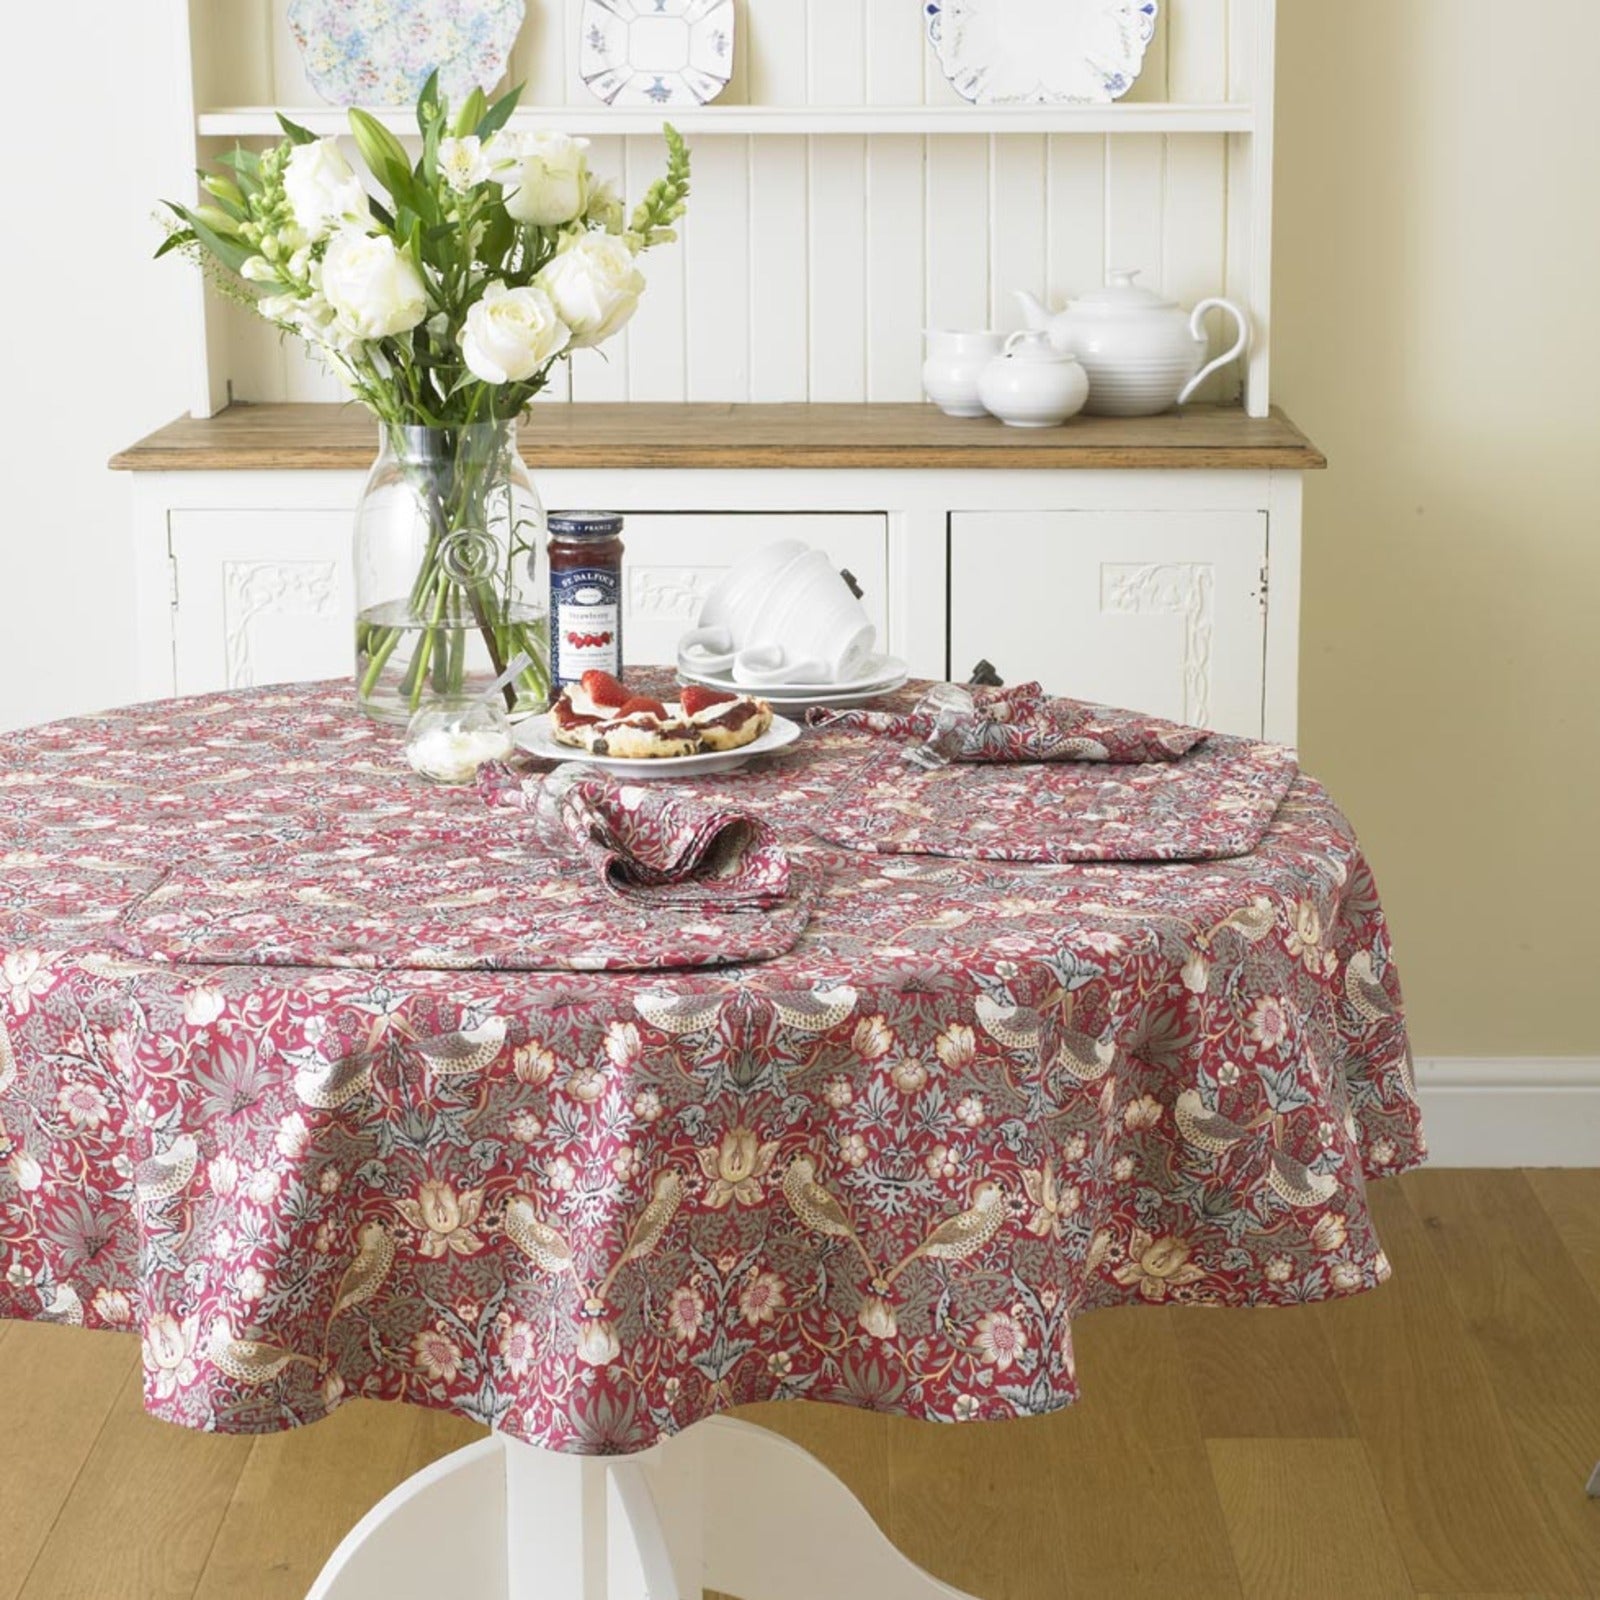 William Morris Red strawberry thief tablecloth round